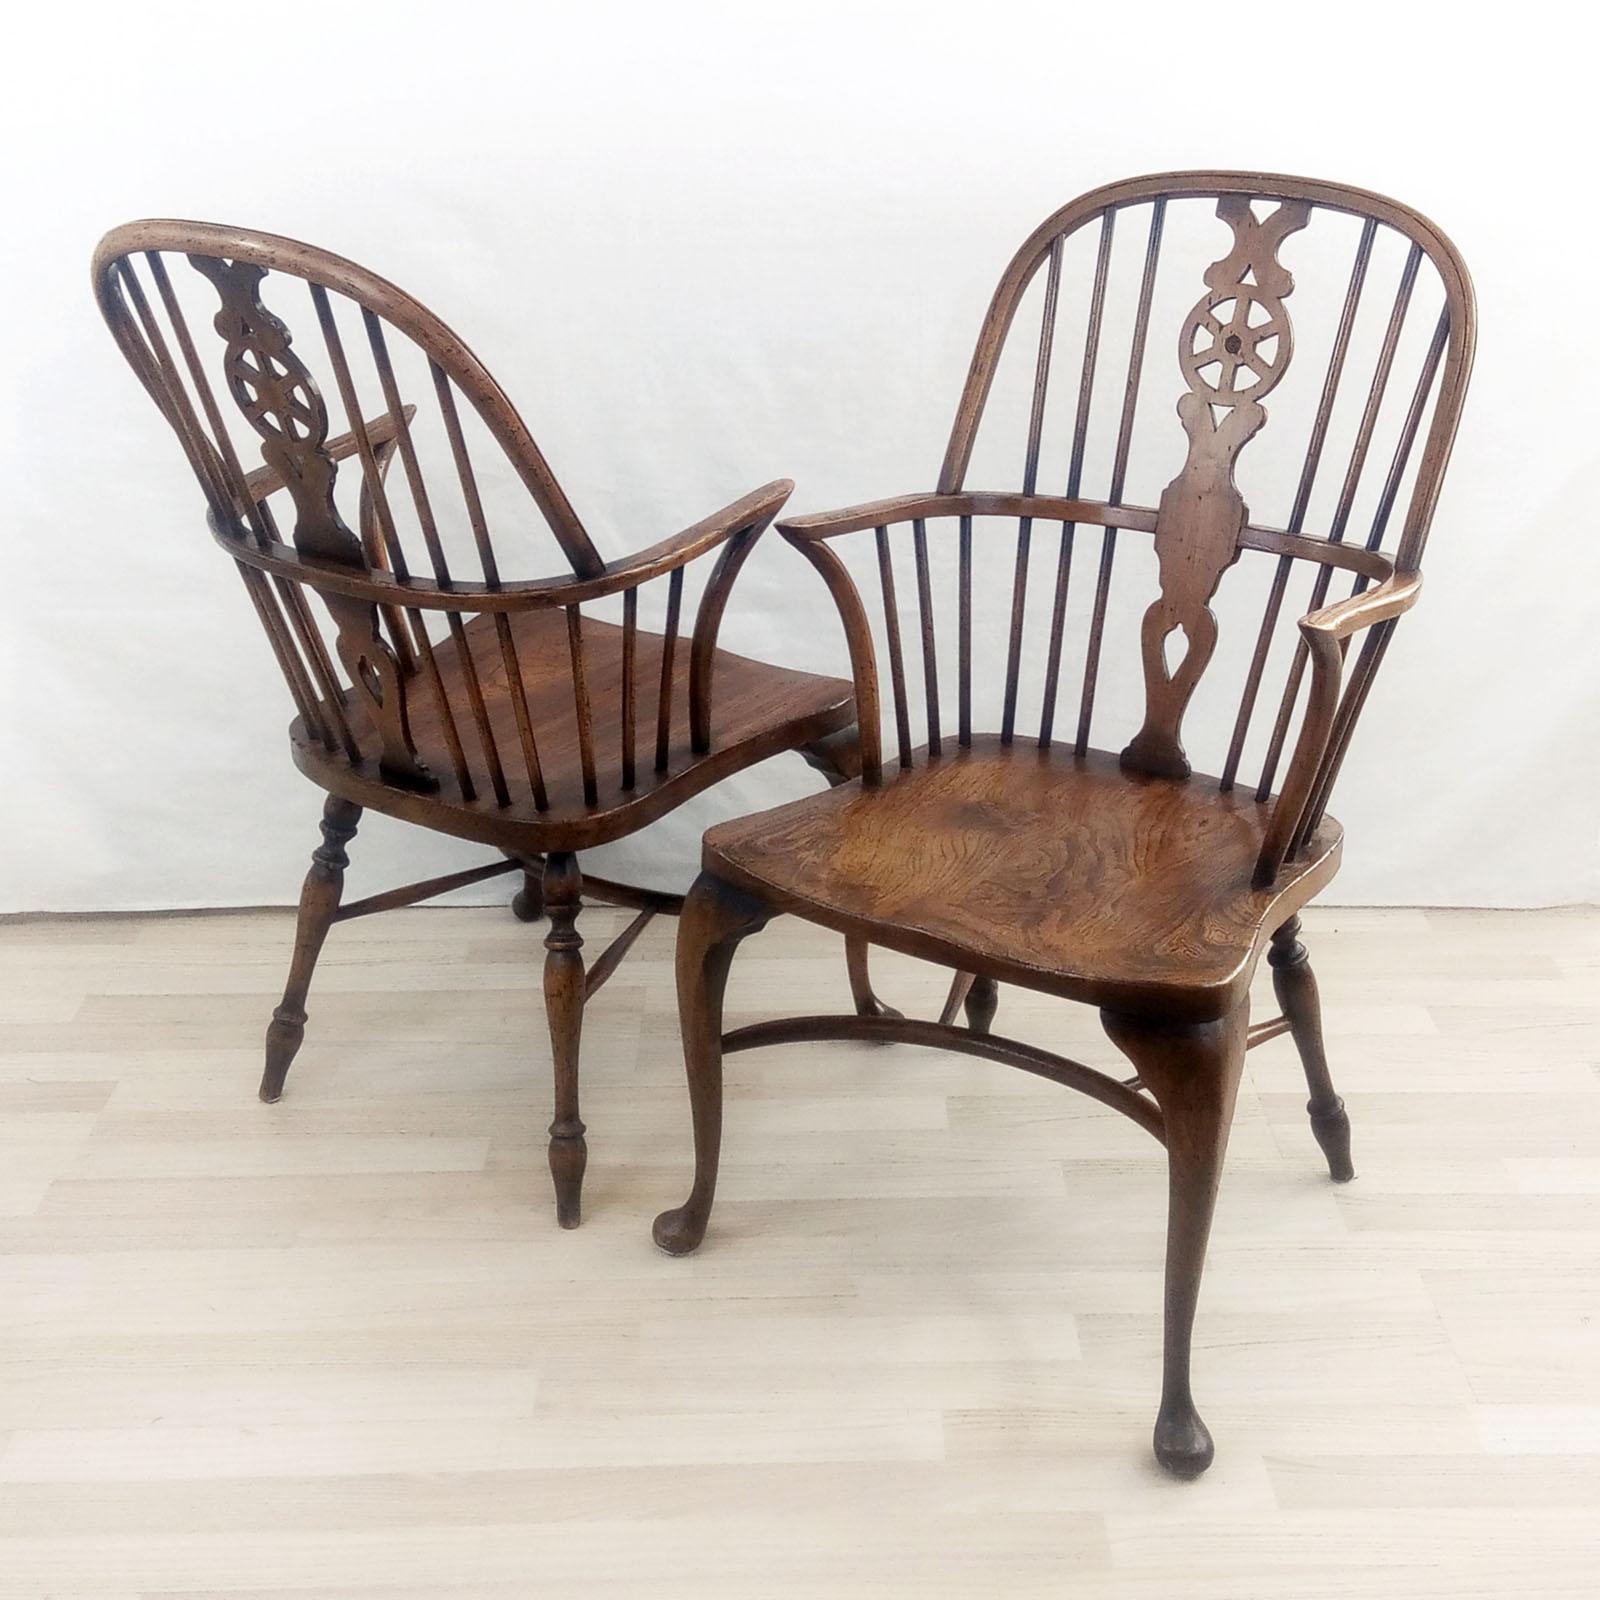 A pair of ash & beech wheelback Windsor armchairs with cabriole leg. Backs and legs made of beech and the seats made of ash. The front legs are of cabriole design, back legs turned, supported with a crinoline stretcher. Original label under the seat